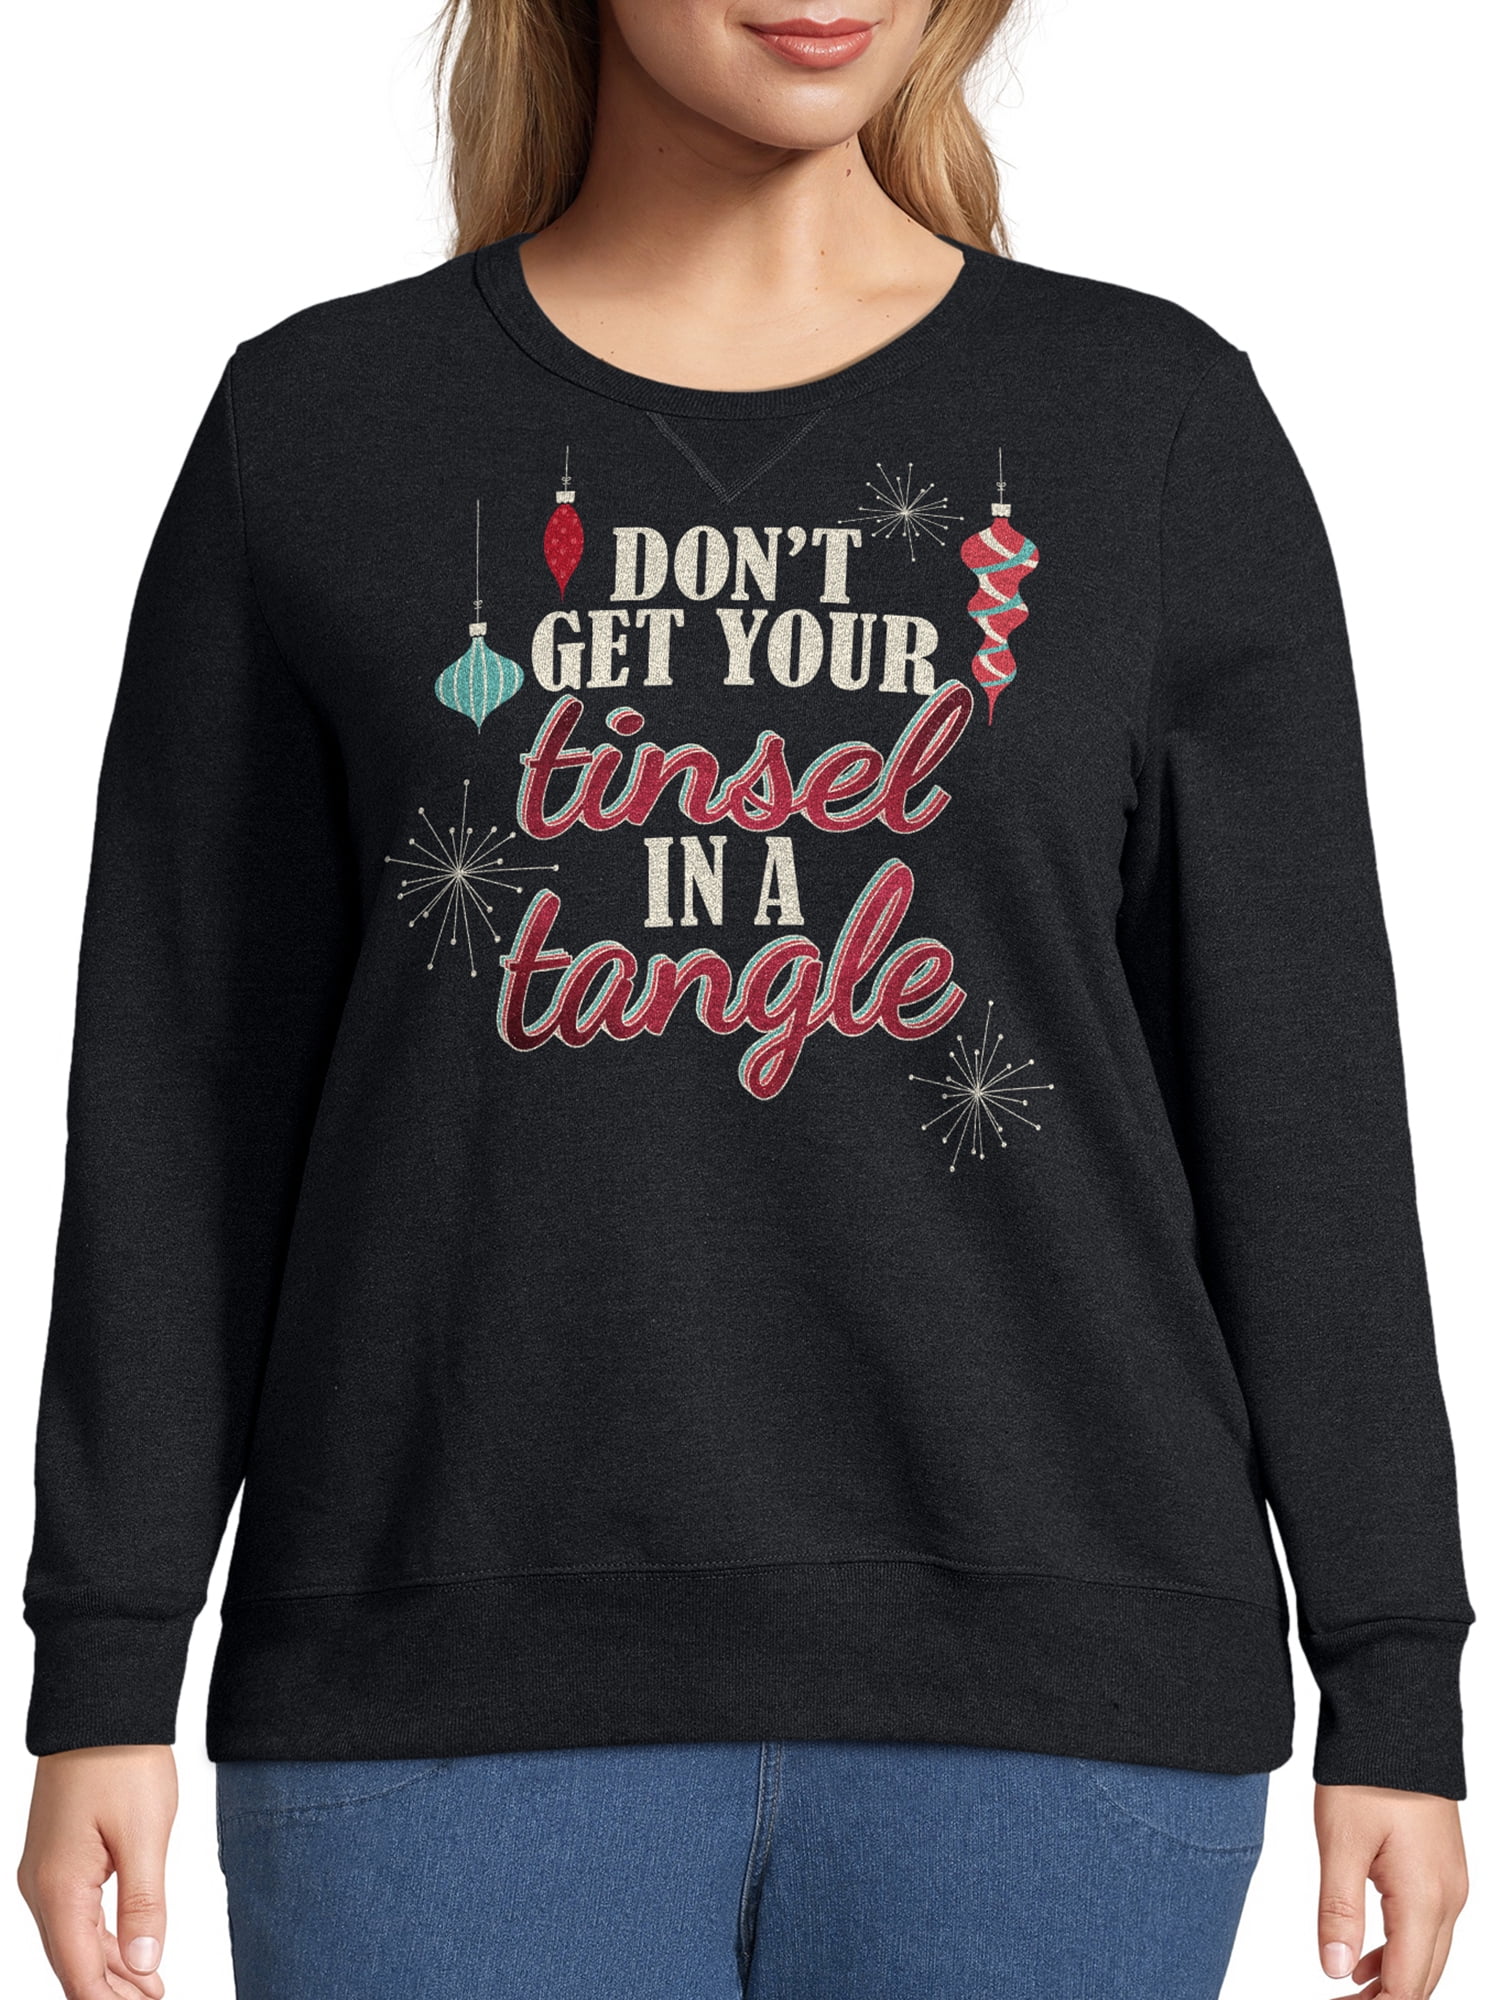 I'm a limited edition Sweater Sweatshirt jumper Christmas  Birthday Gift Top